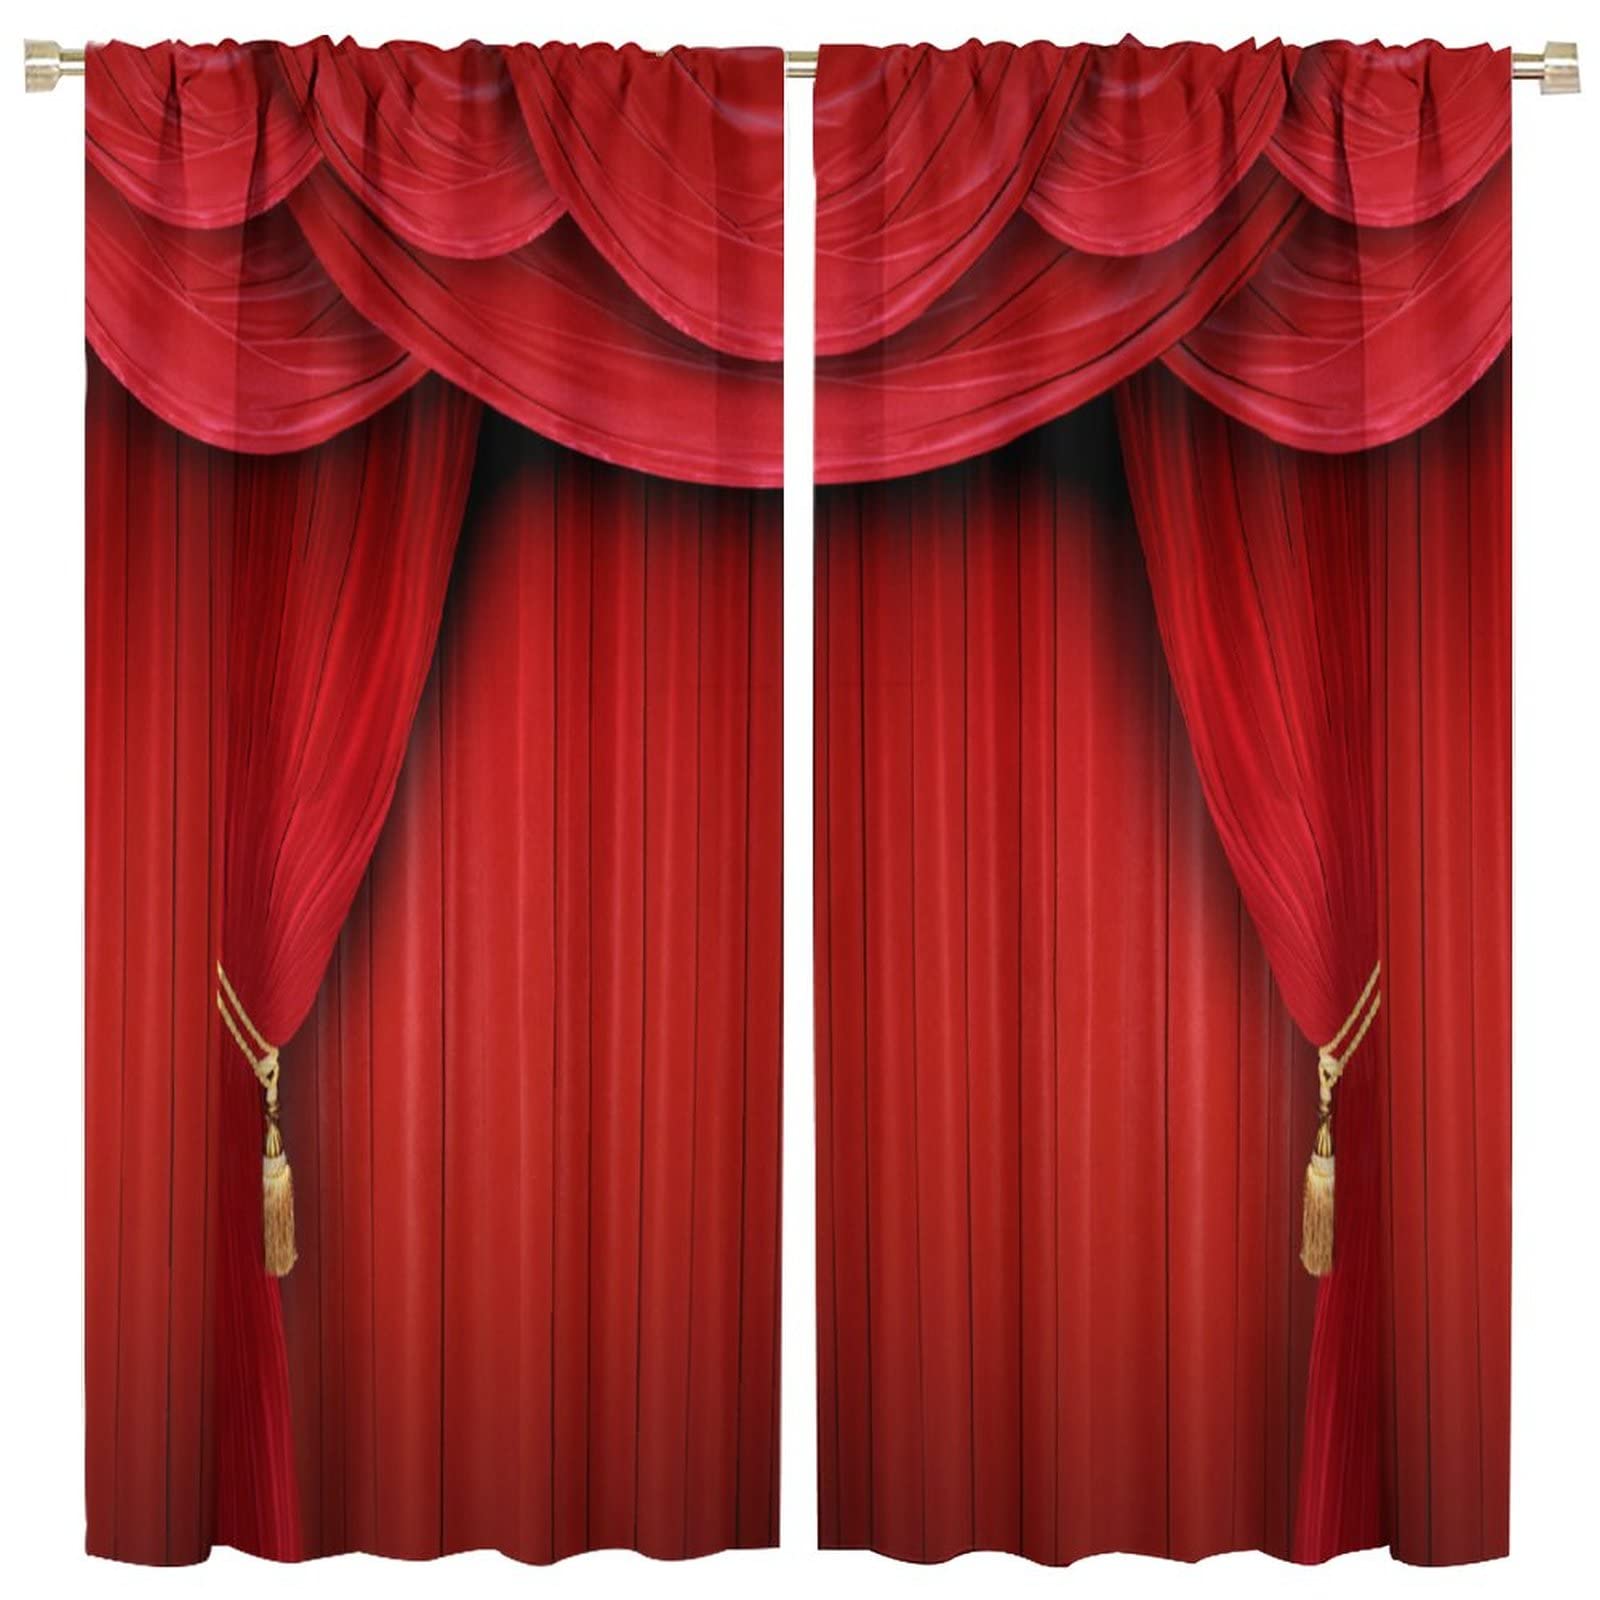 Movie Theater Curtains